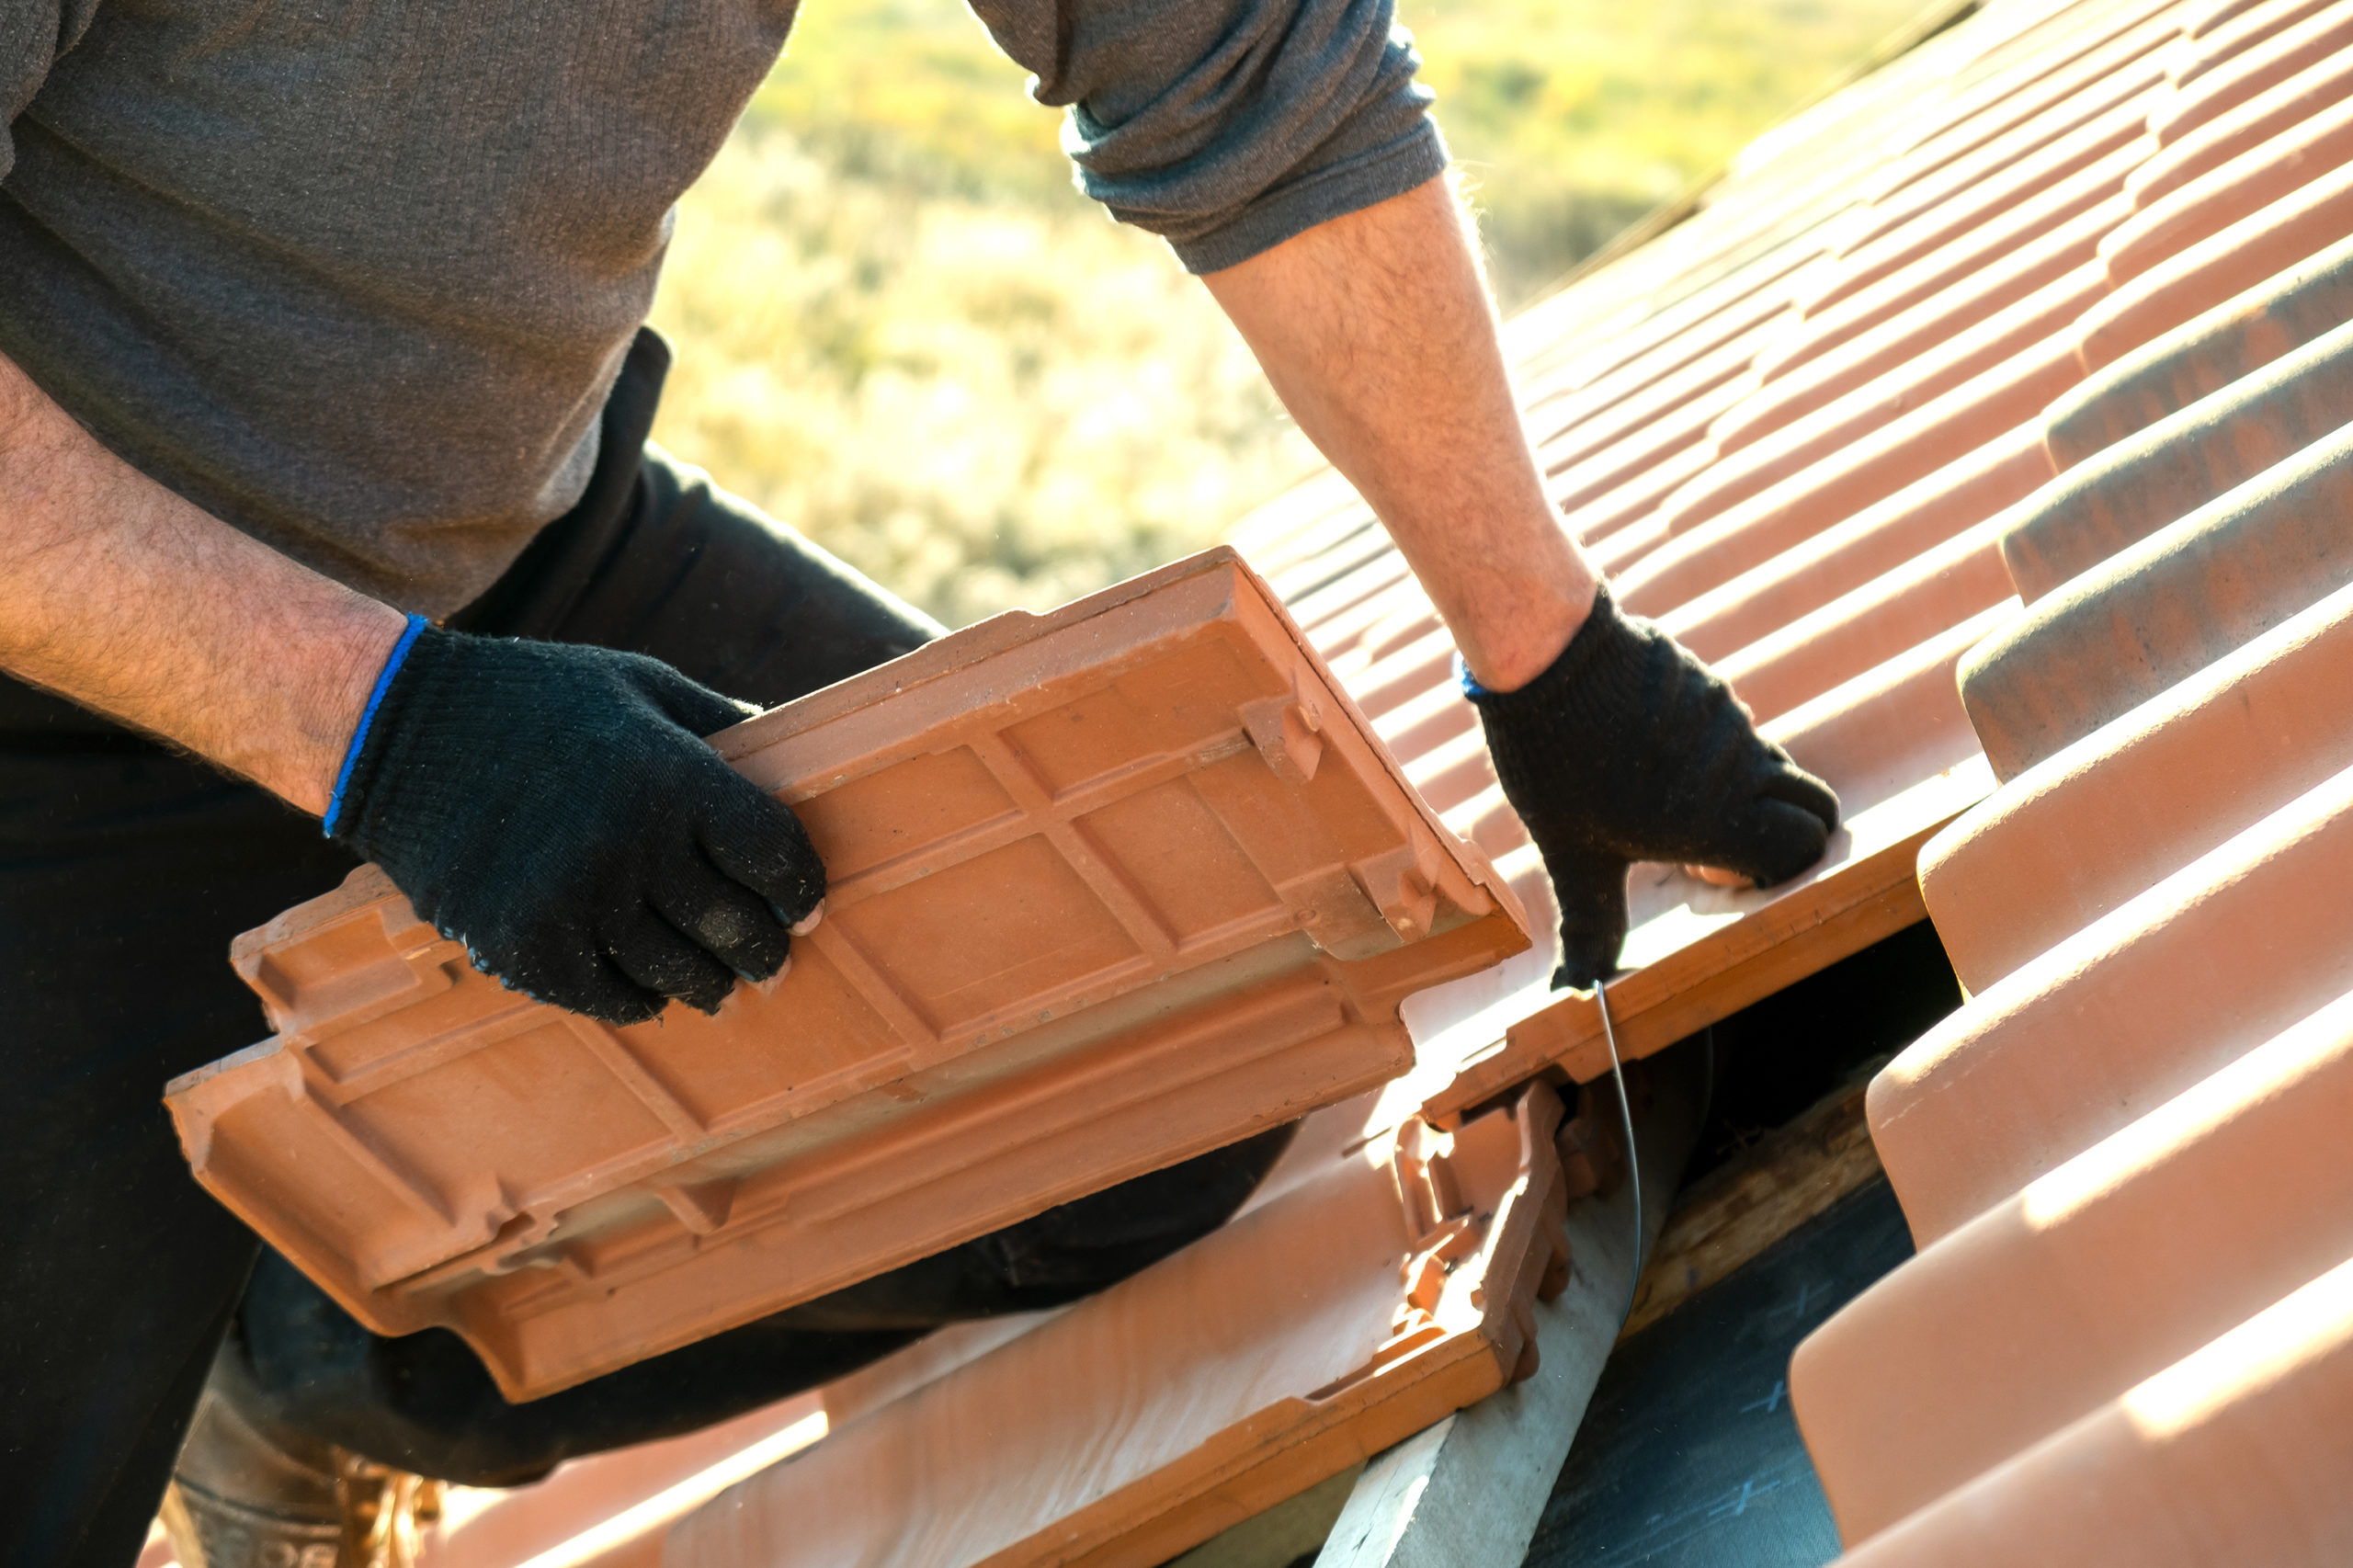 A close-up image of a roofing contractor installing new tiles on a residential roof